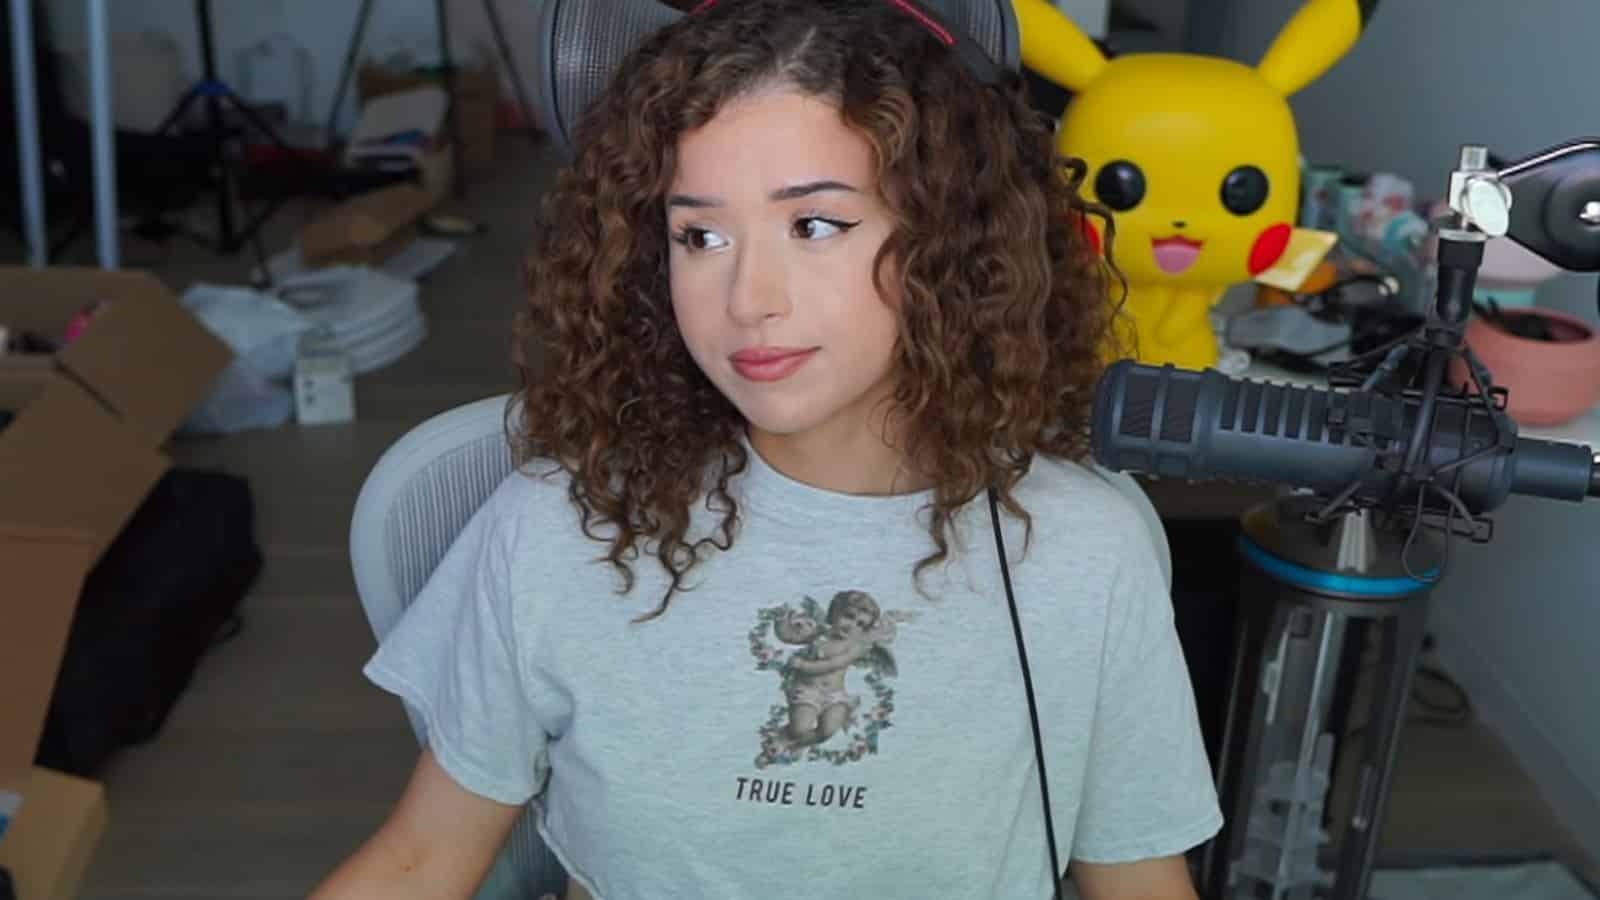 Pokimane says shes flying back to canada after scotus decision roe v wade